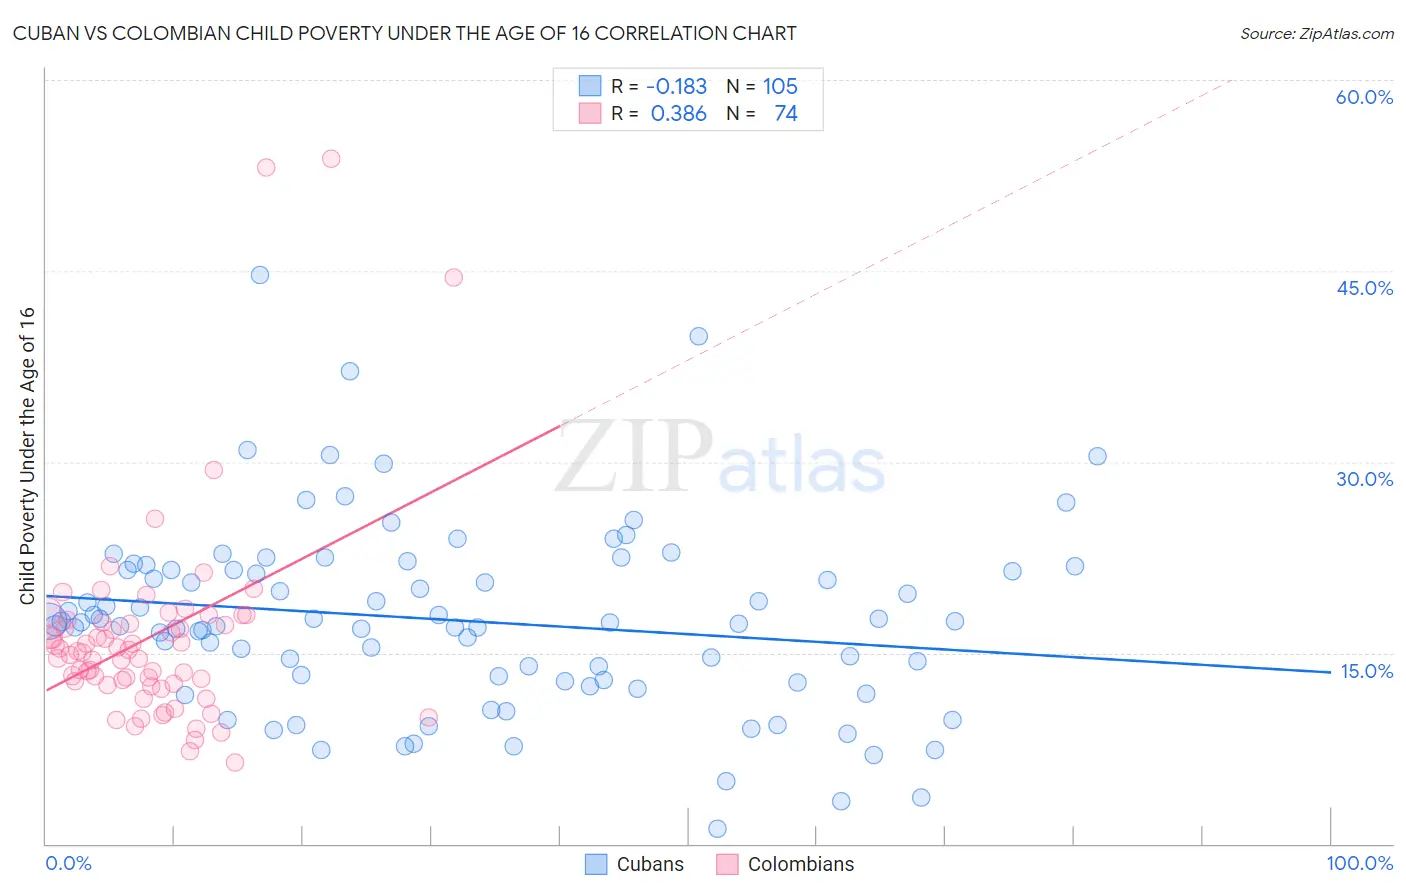 Cuban vs Colombian Child Poverty Under the Age of 16